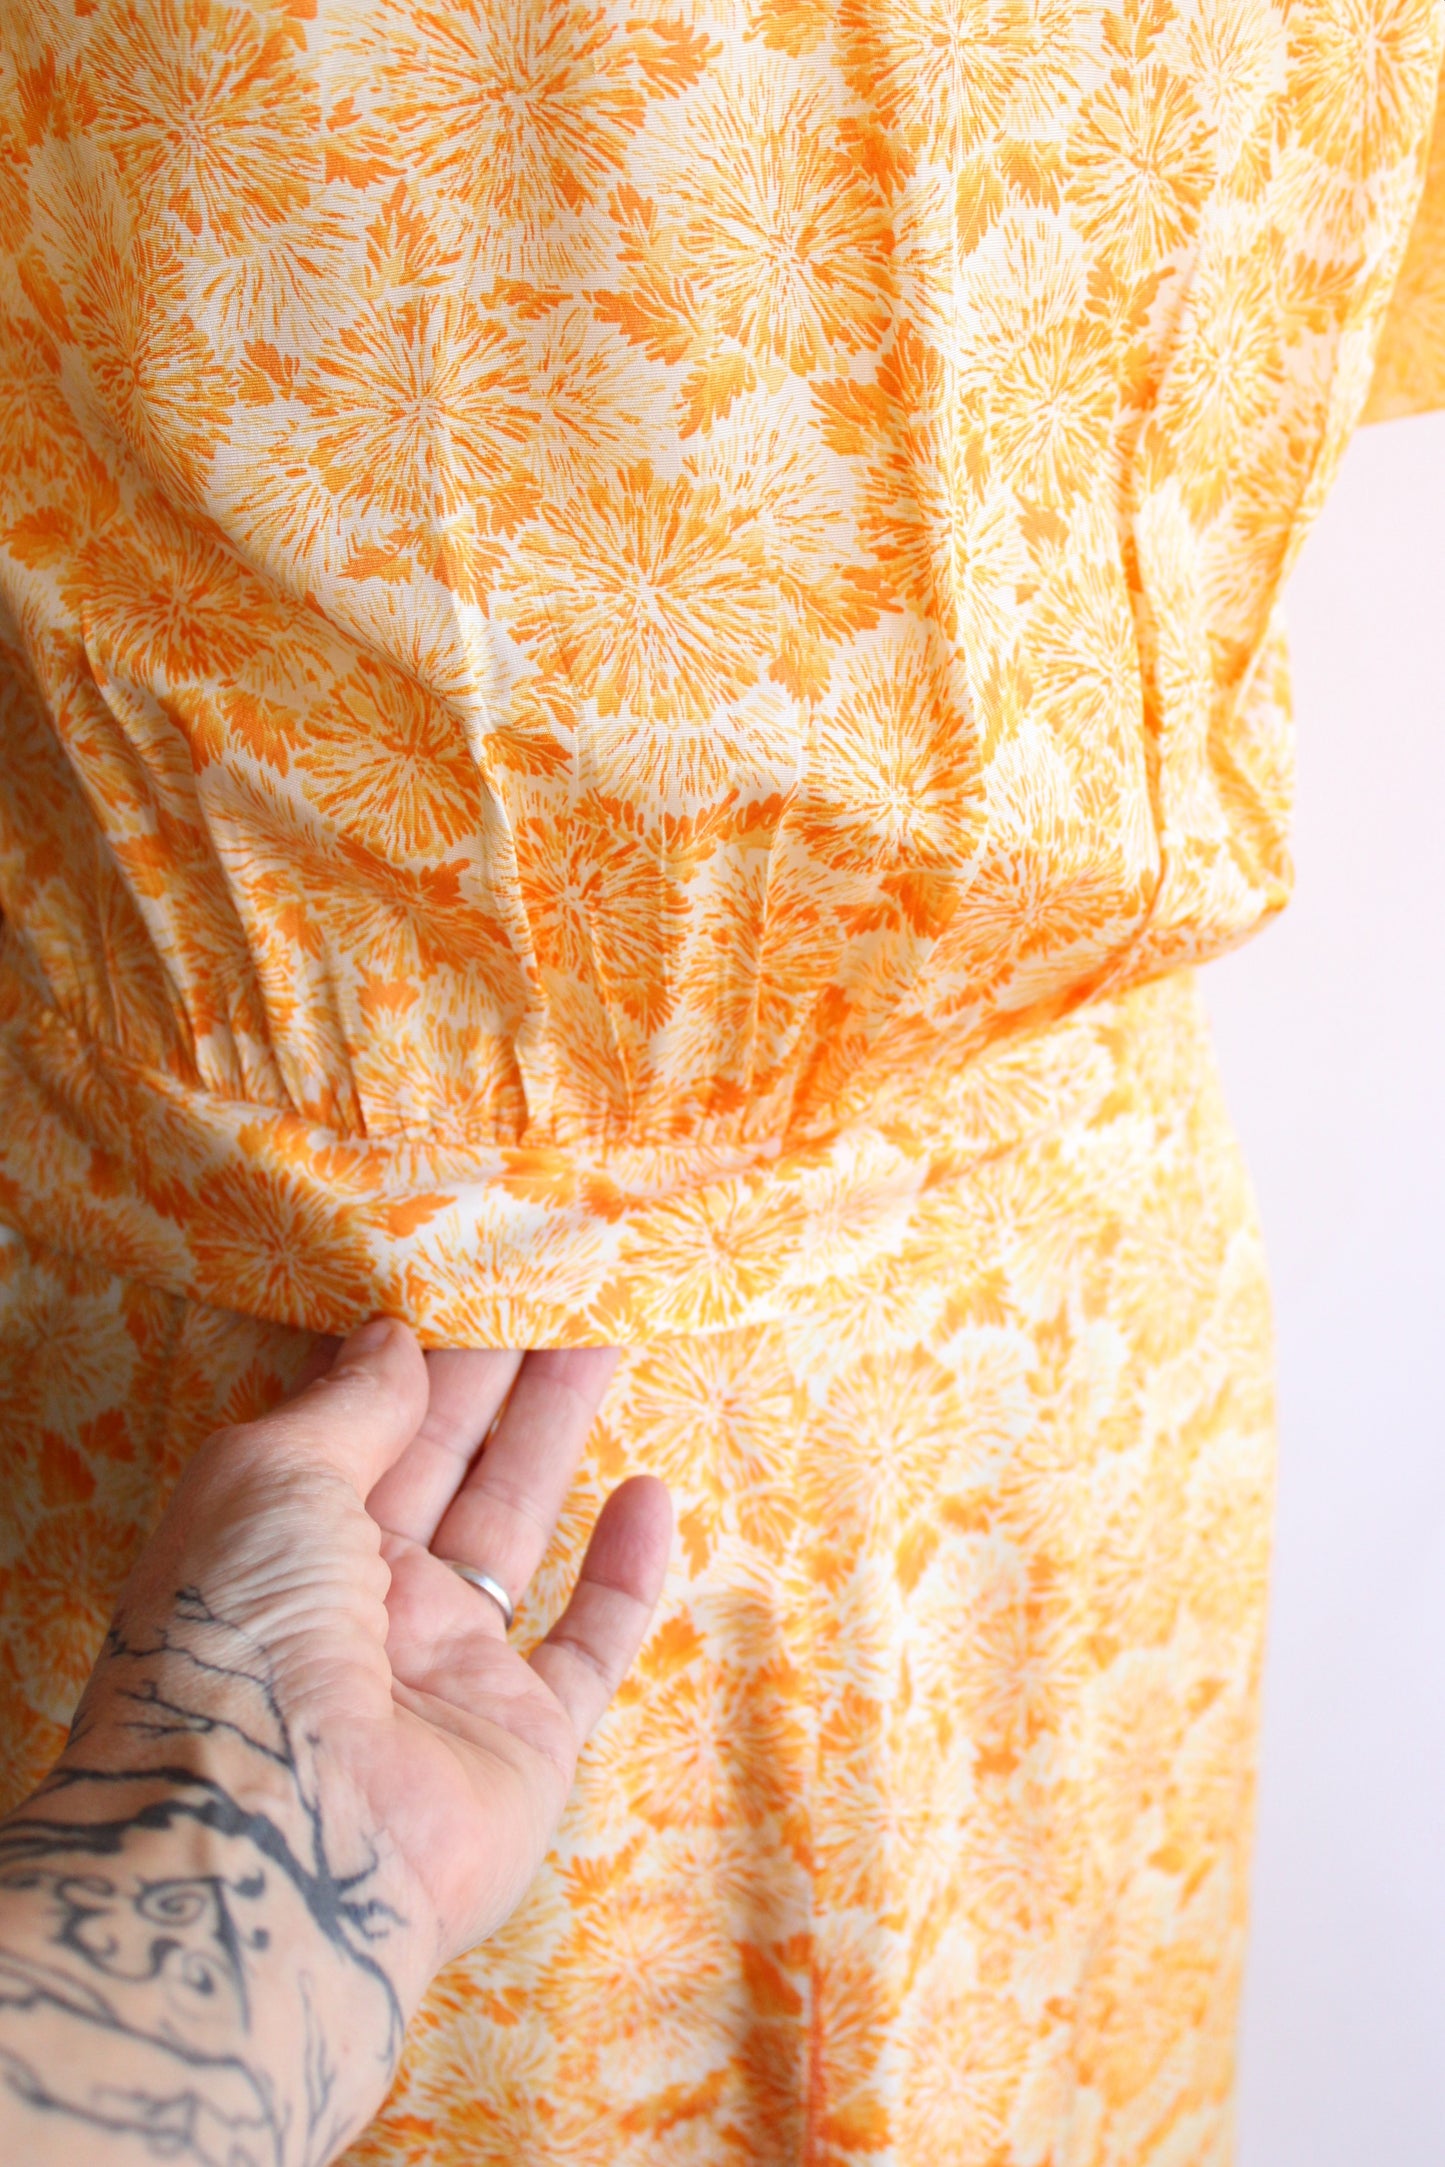 Vintage 1950s Day Dress in an Orange Abstract Floral